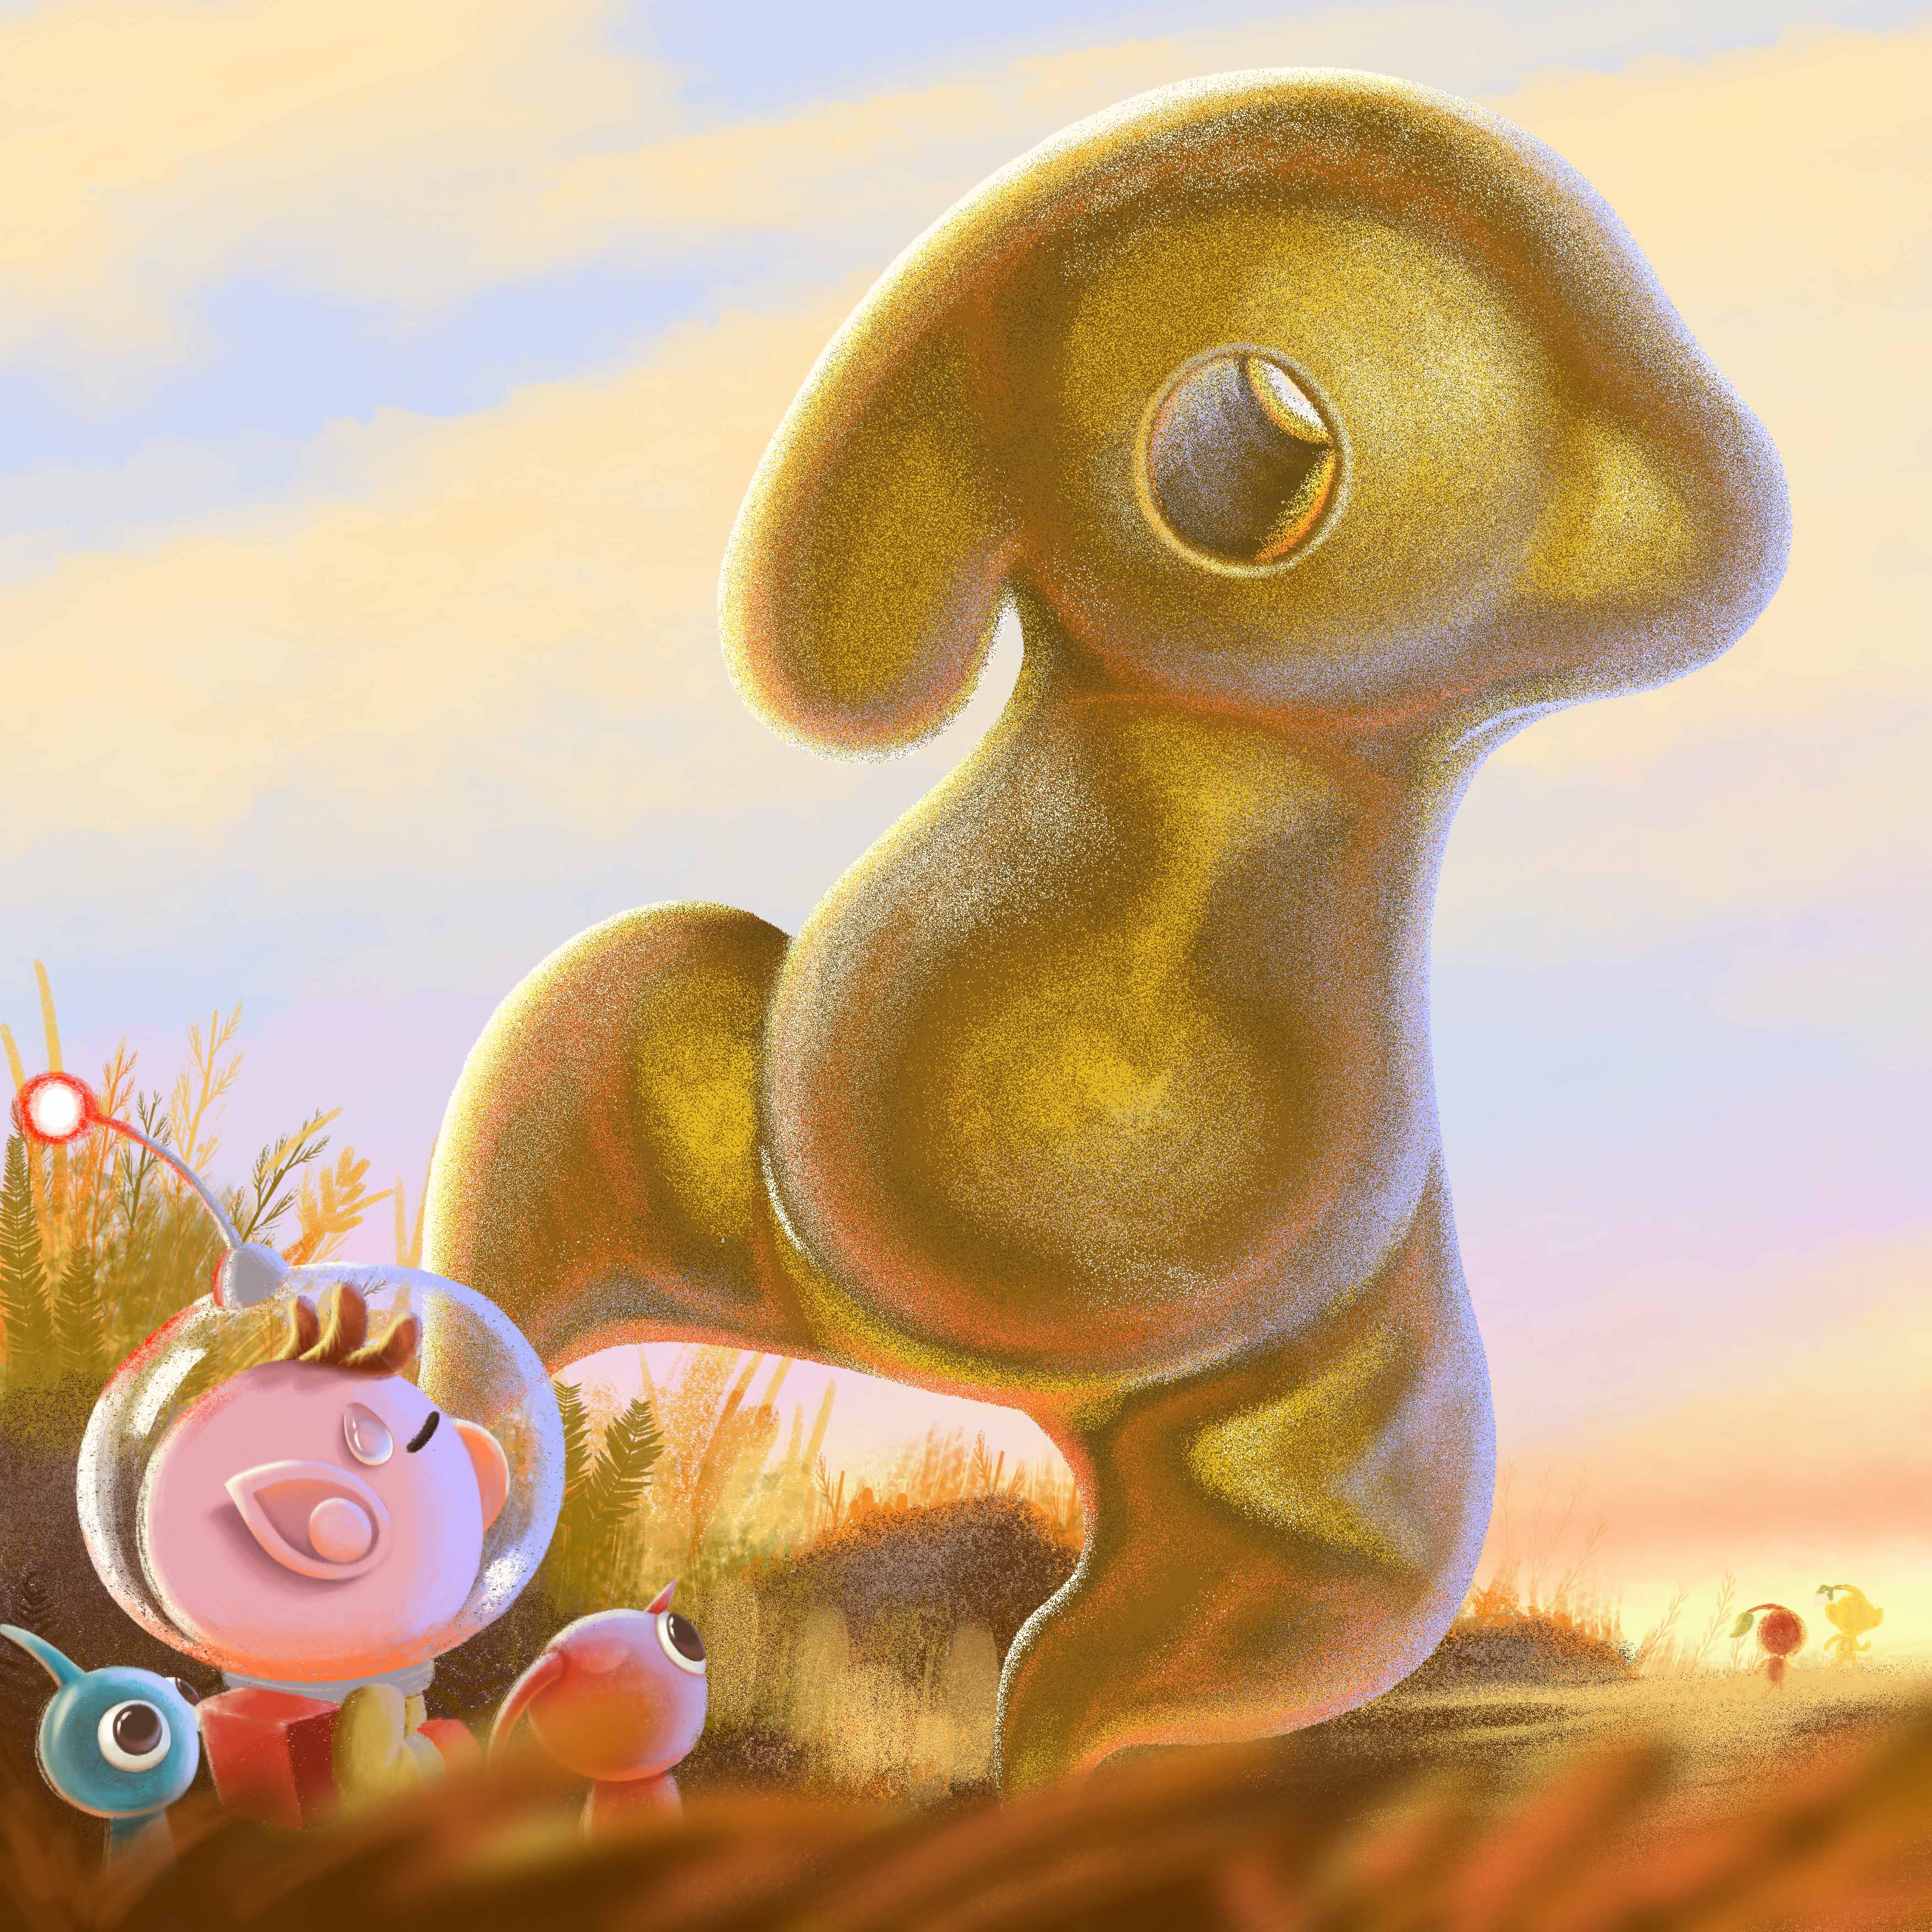 BA Animation work by Amber Iles showing a piece of fan art from the game Pikmin.